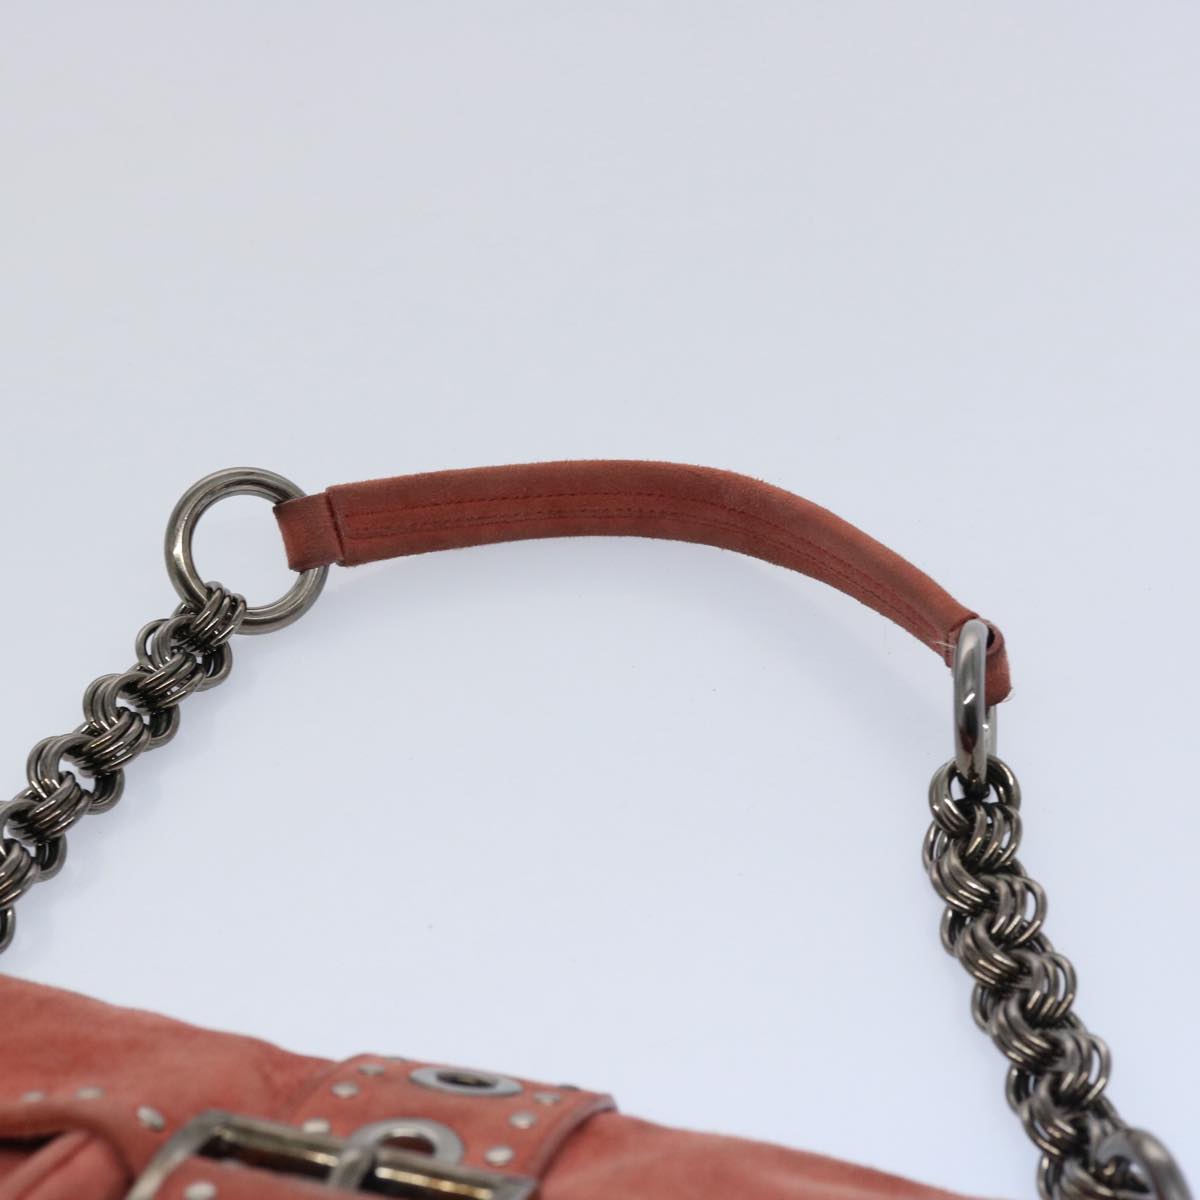 PRADA Chain Shoulder Bag Suede Red Auth bs10796